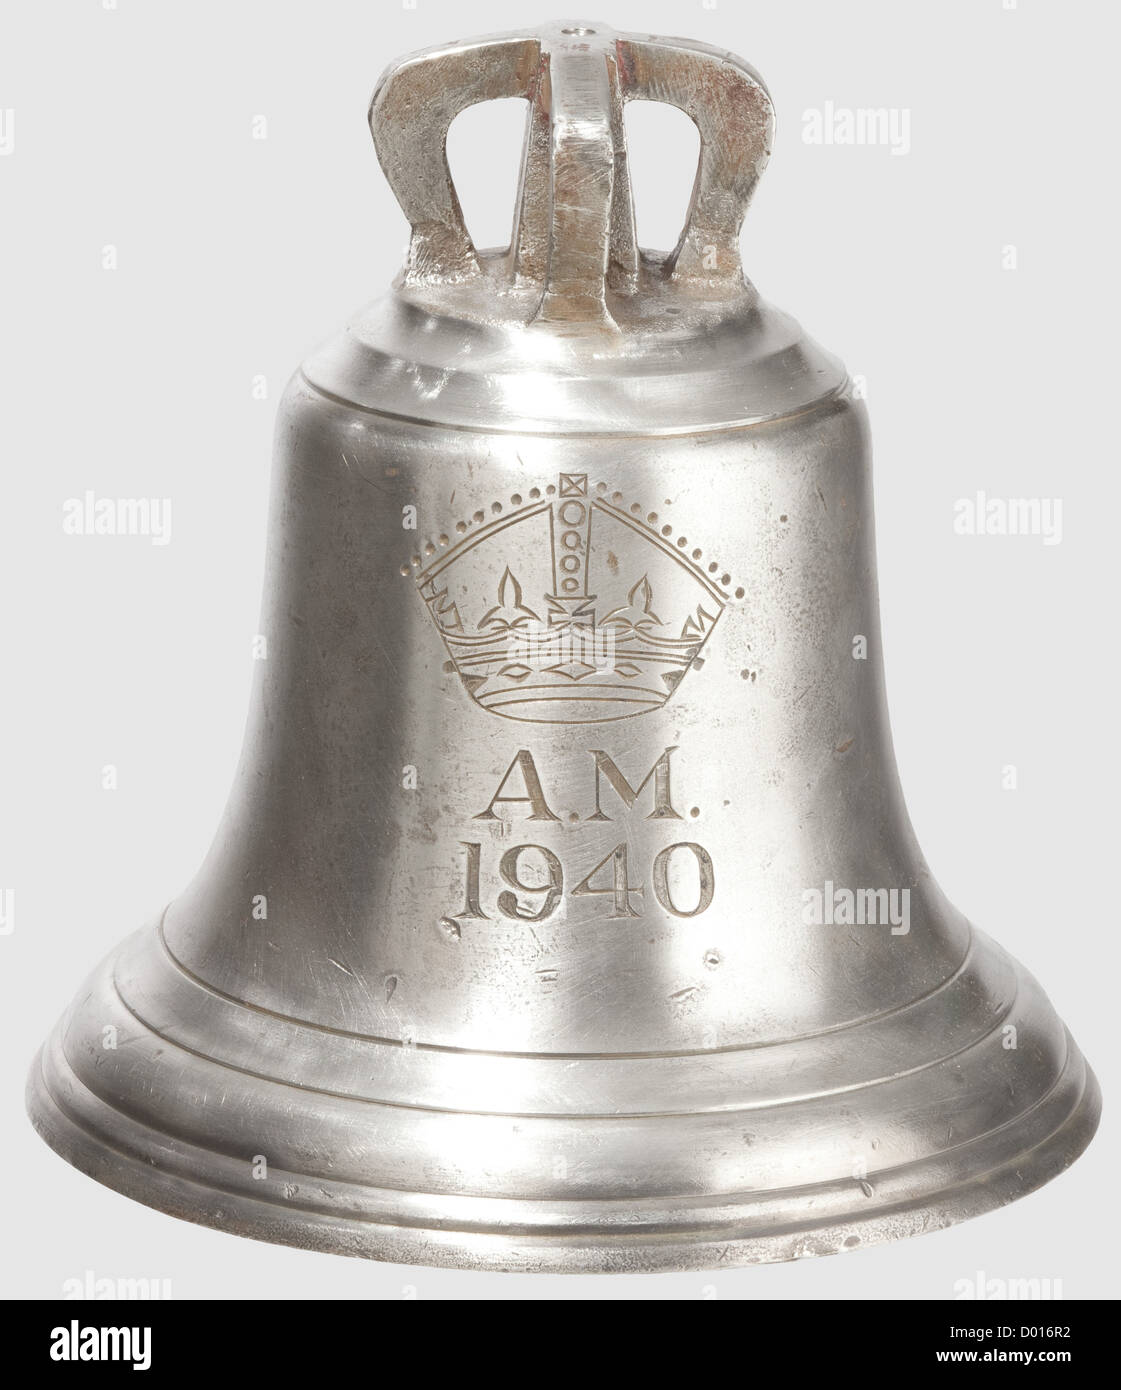 A 'Scramble' Bell,1940. An early World War Two Royal Air Force 'Scramble' Bell,according to the Air Ministry pattern 27 cm. diam. cast in bright alloy and engraved with the King George VI crown and A.M. 1940 cypher,the interior surface with many 'strike' marks,clapper missing,the outer surface cleaned,the inner surface in as found condition. A remarkable 'find' from an English scrapyard of an historic 'Battle-of-Britain' period memento,27 cm high,historic,historical,1930s,20th century,object,objects,stills,clipping,clippings,cut out,cut-out,c,Additional-Rights-Clearences-Not Available Stock Photo